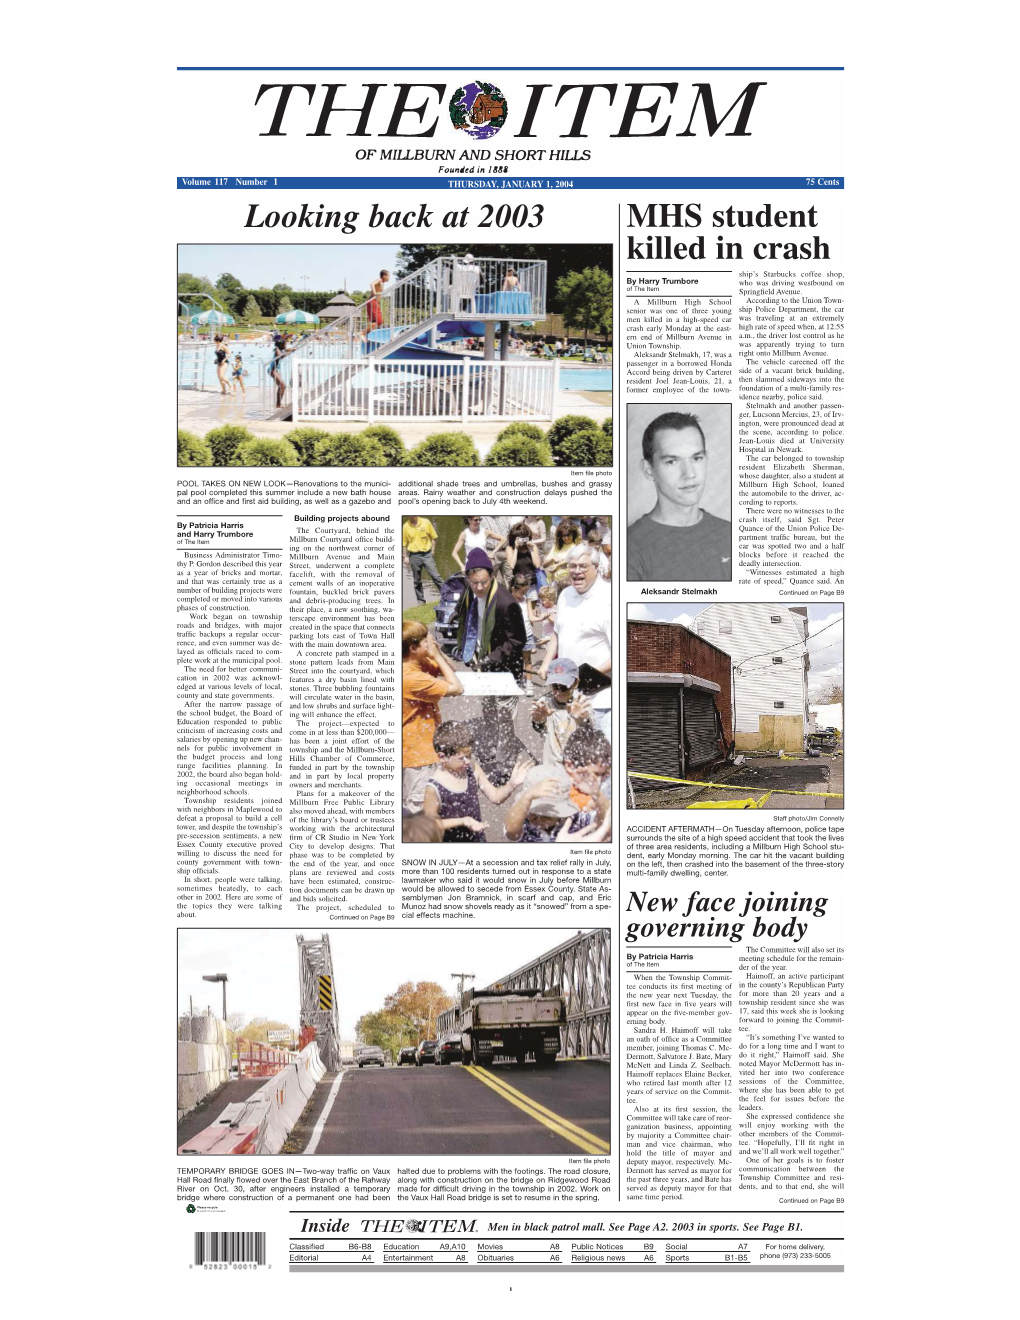 MHS Student Killed in Crash Looking Back at 2003